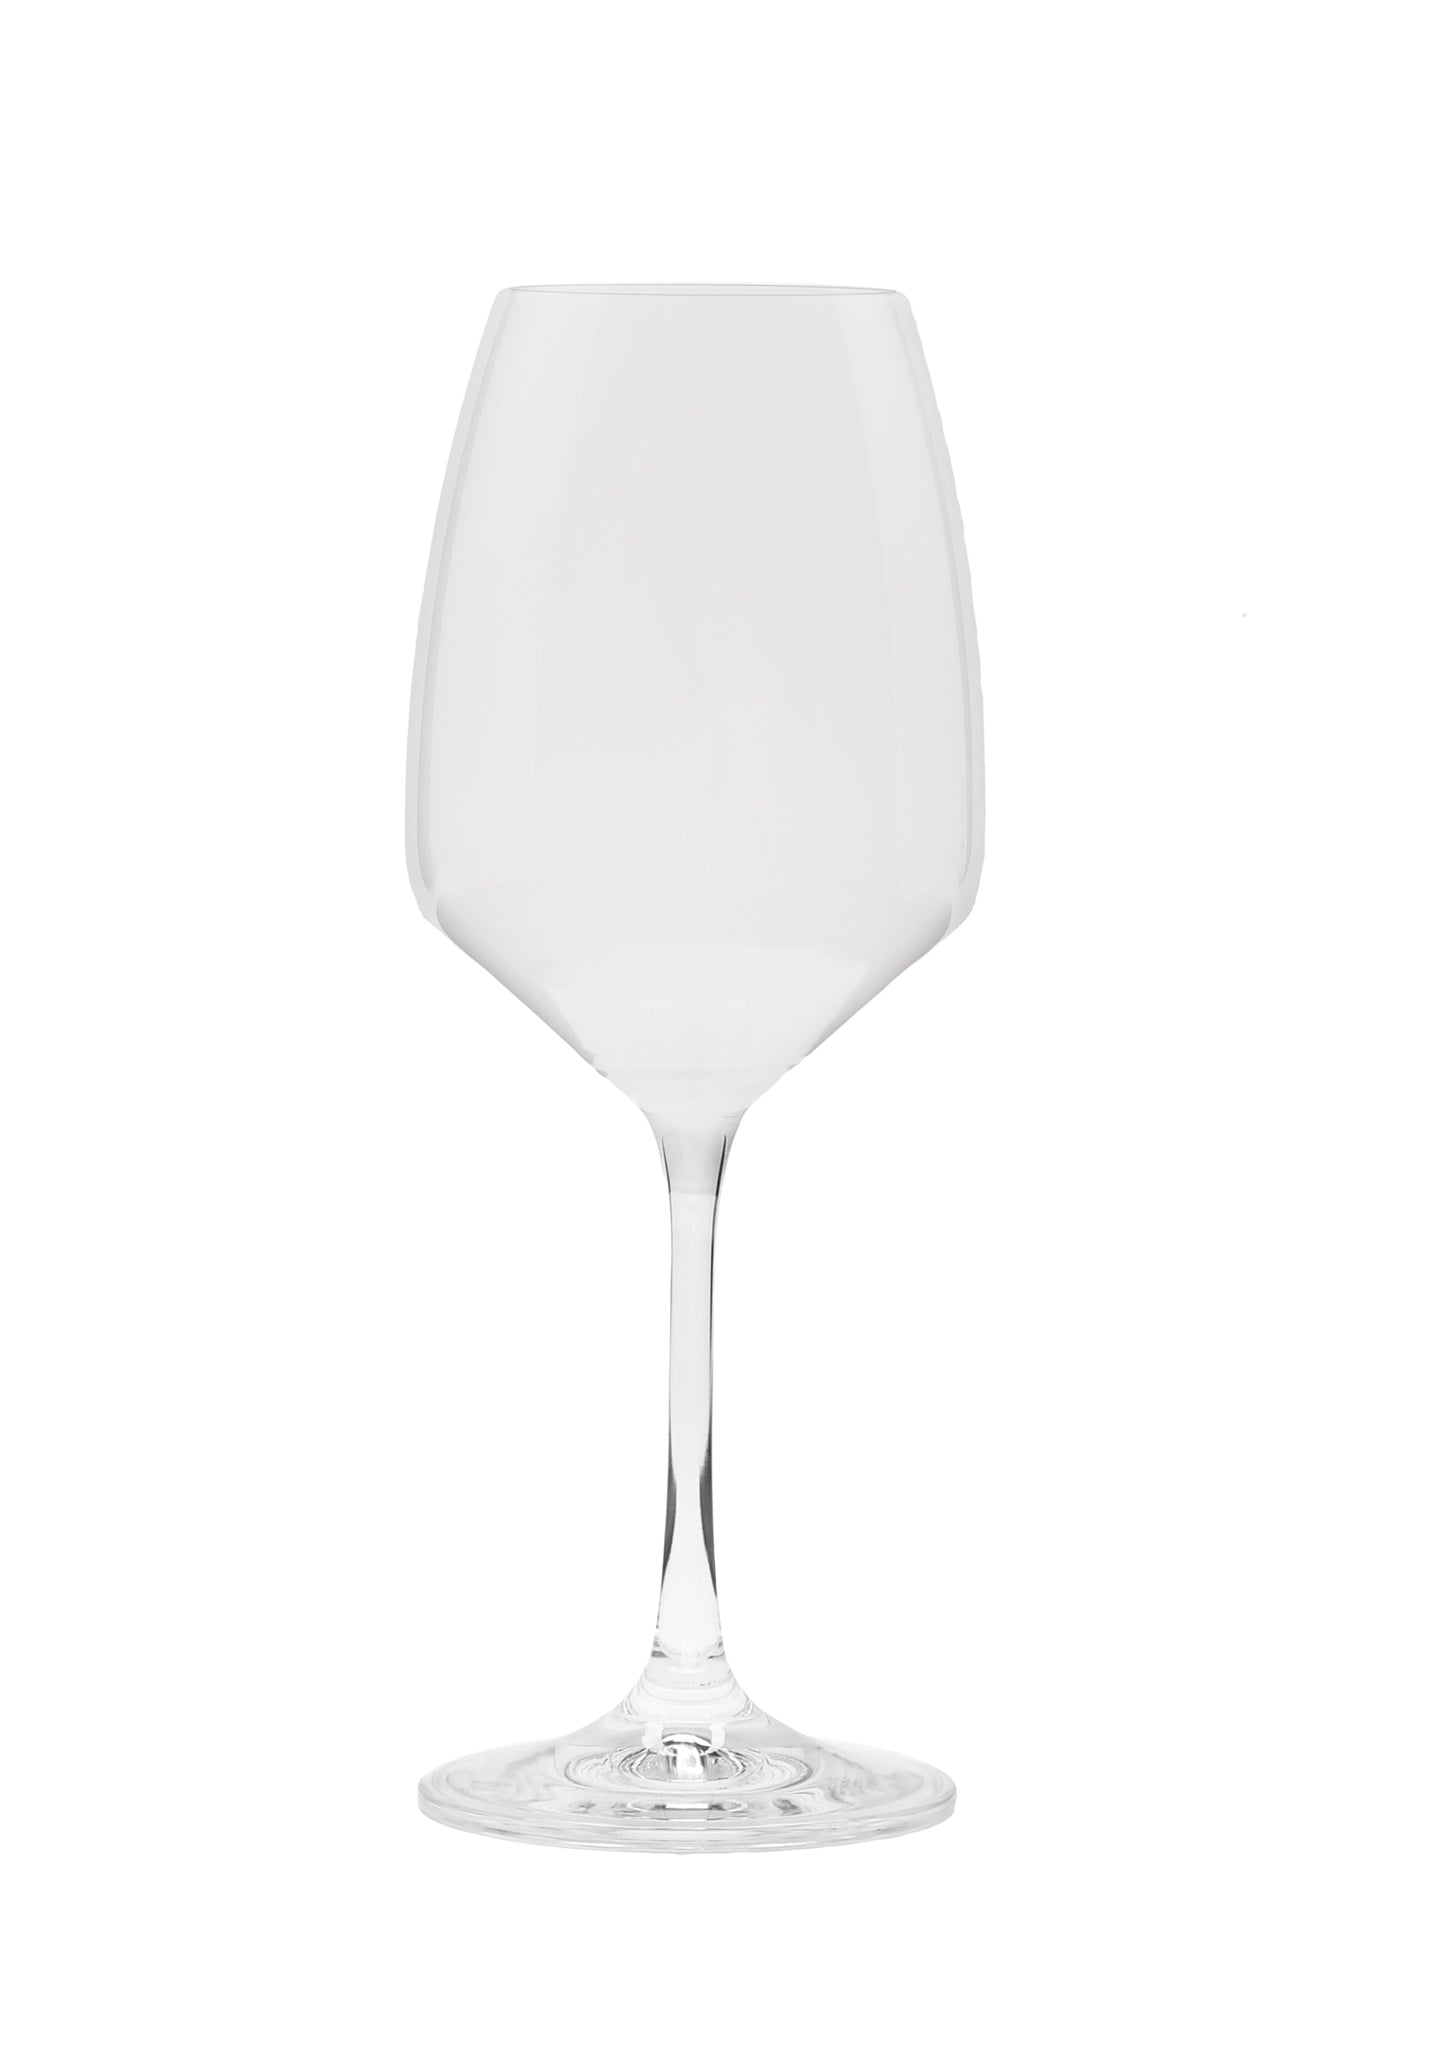 Set of 6 White Wine Glasses with Clear Stem